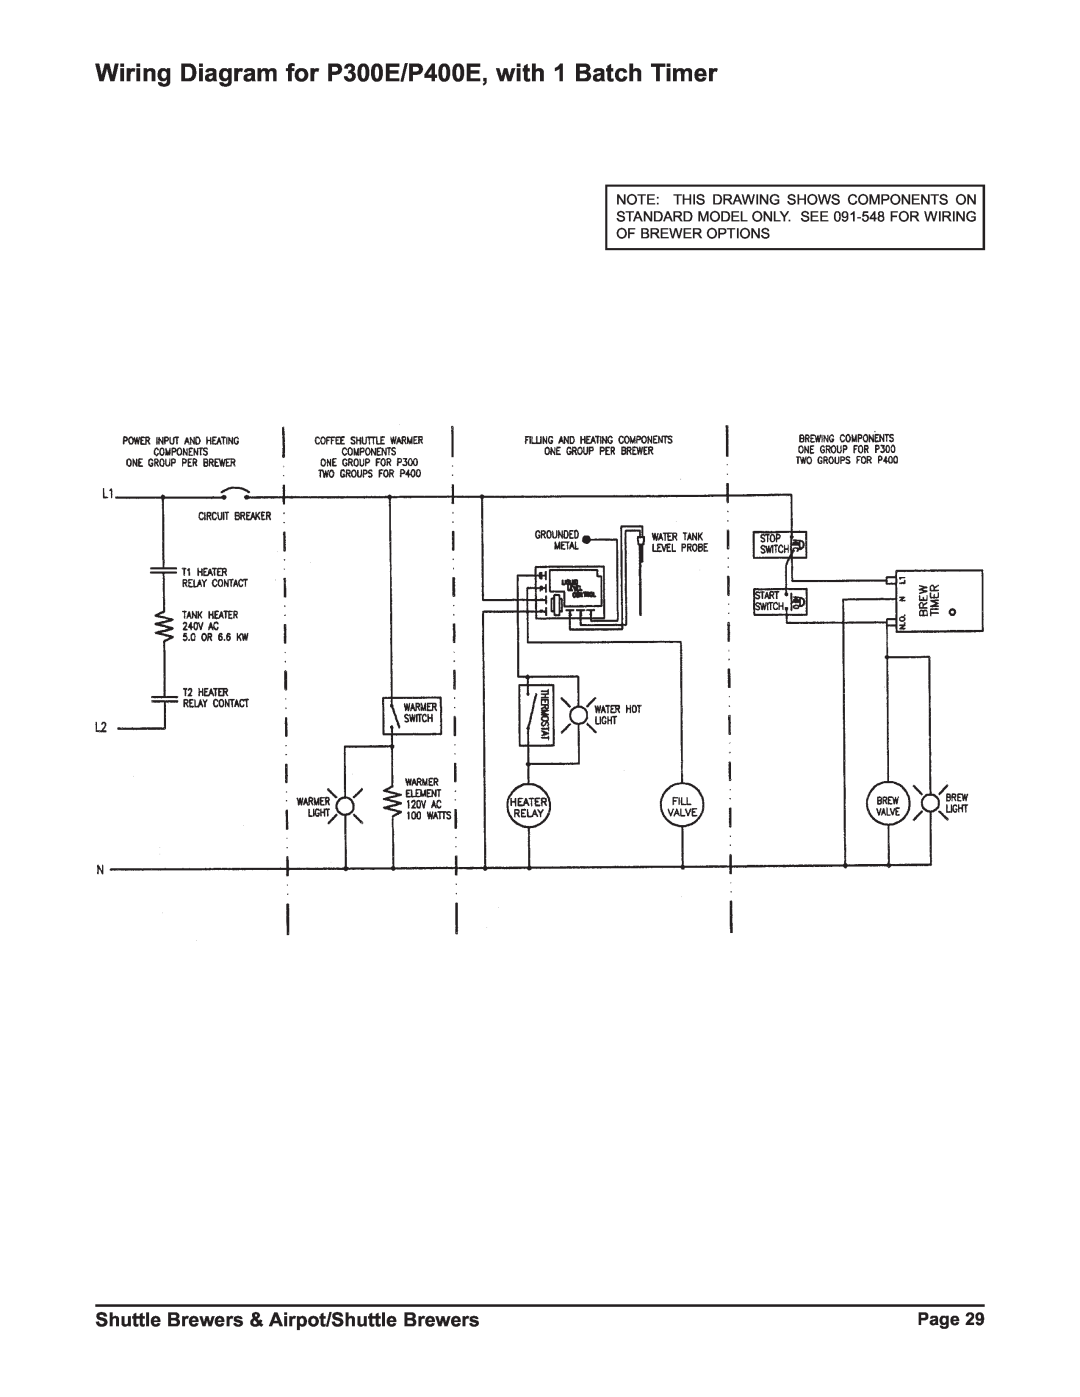 Grindmaster P400ESHP Wiring Diagram for P300E/P400E, with 1 Batch Timer, Shuttle Brewers & Airpot/Shuttle Brewers 